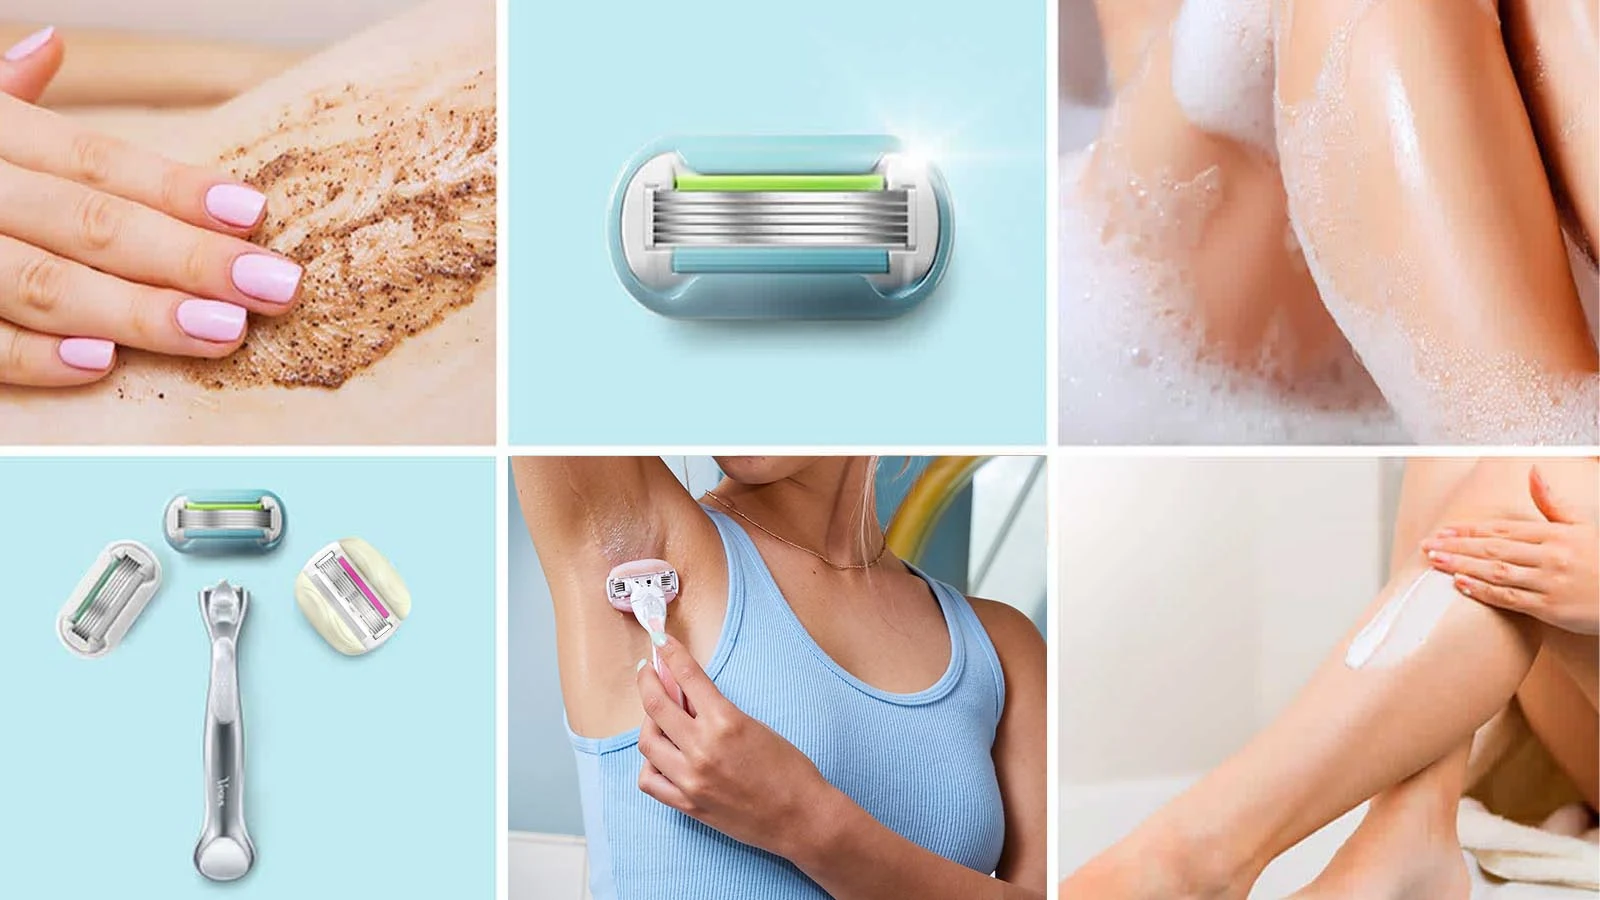 A collage of different images containing shaving, bathing and razor themes